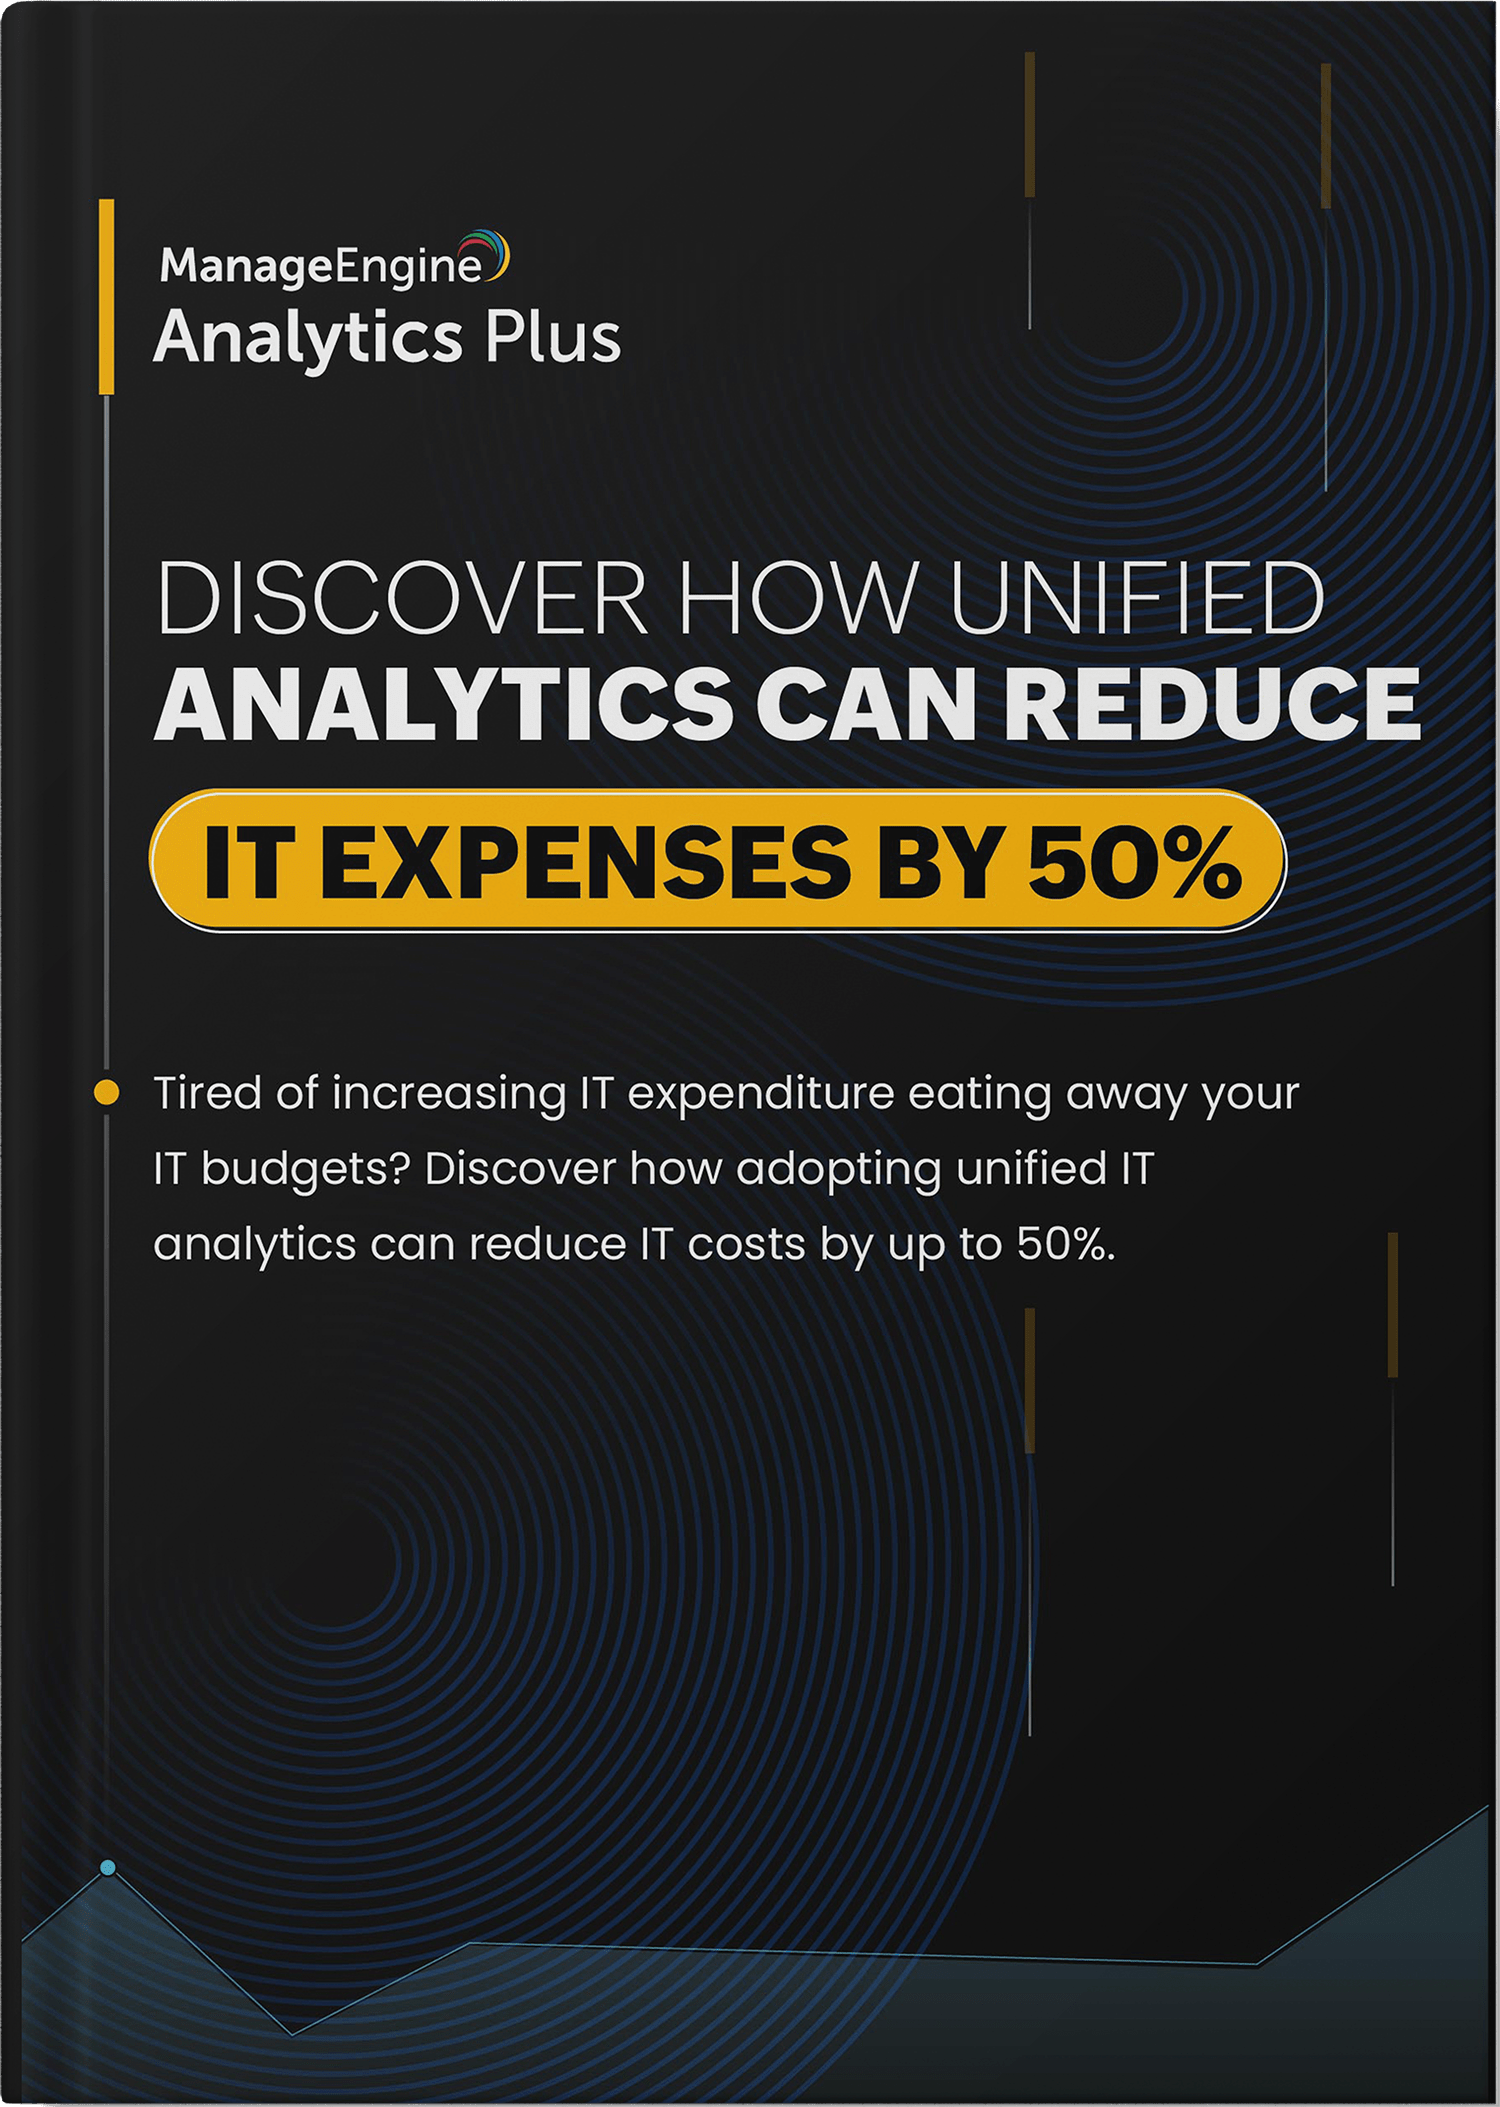 Reduce IT operational costs by 50% using unified IT analytics